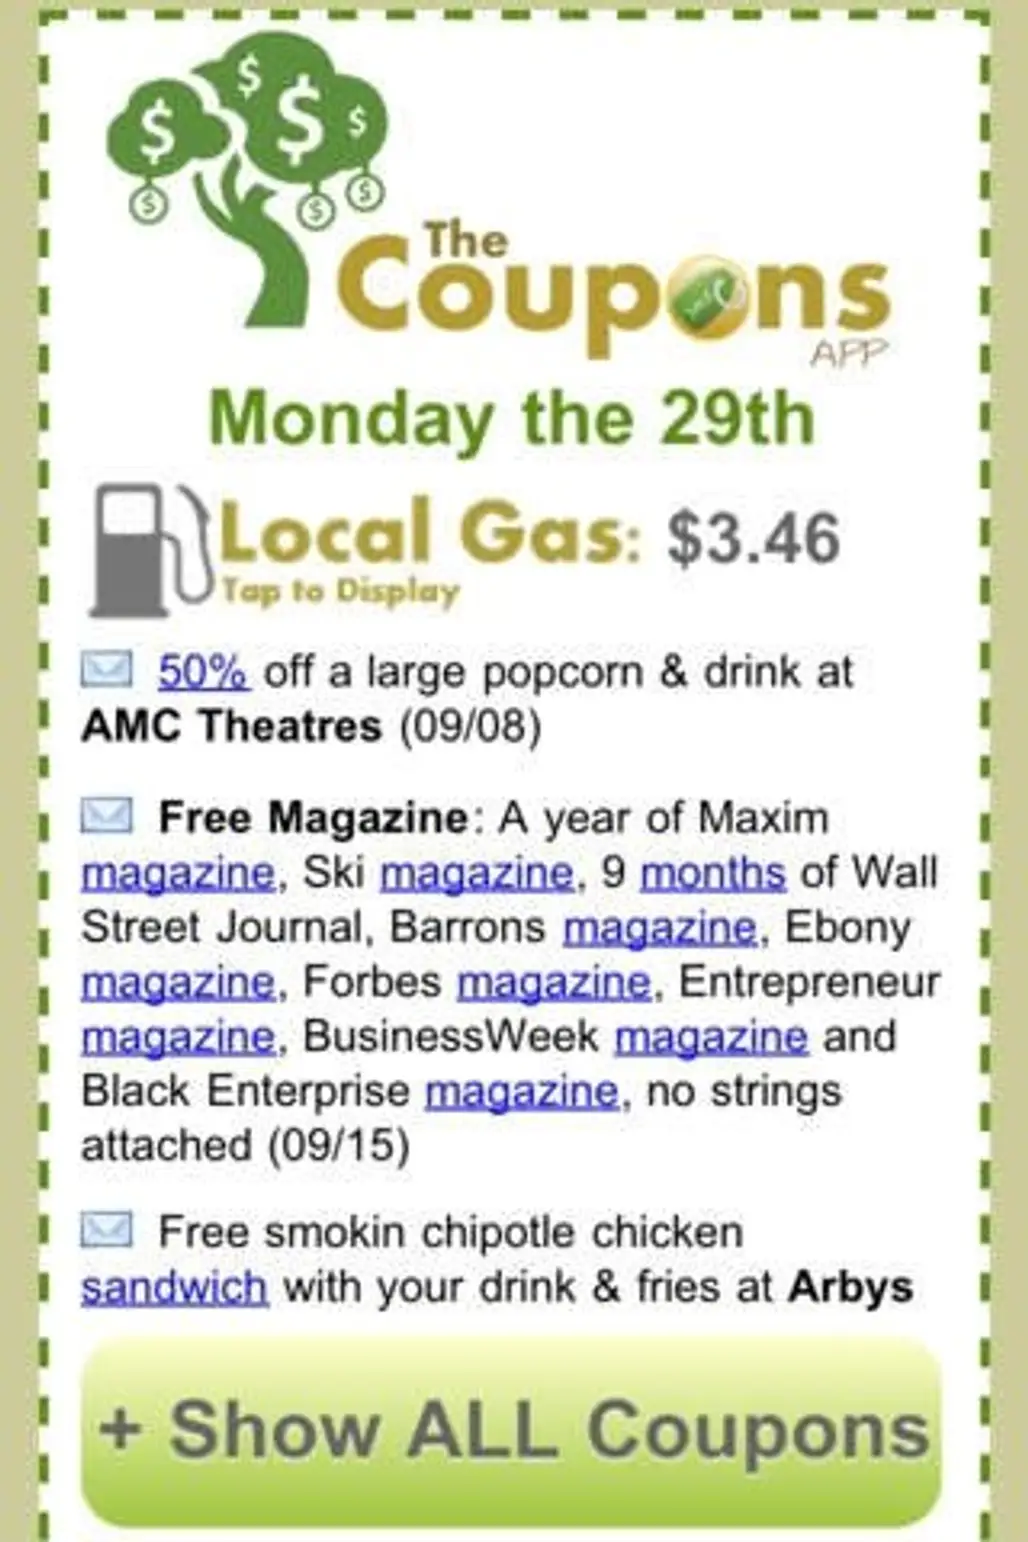 The Coupon App